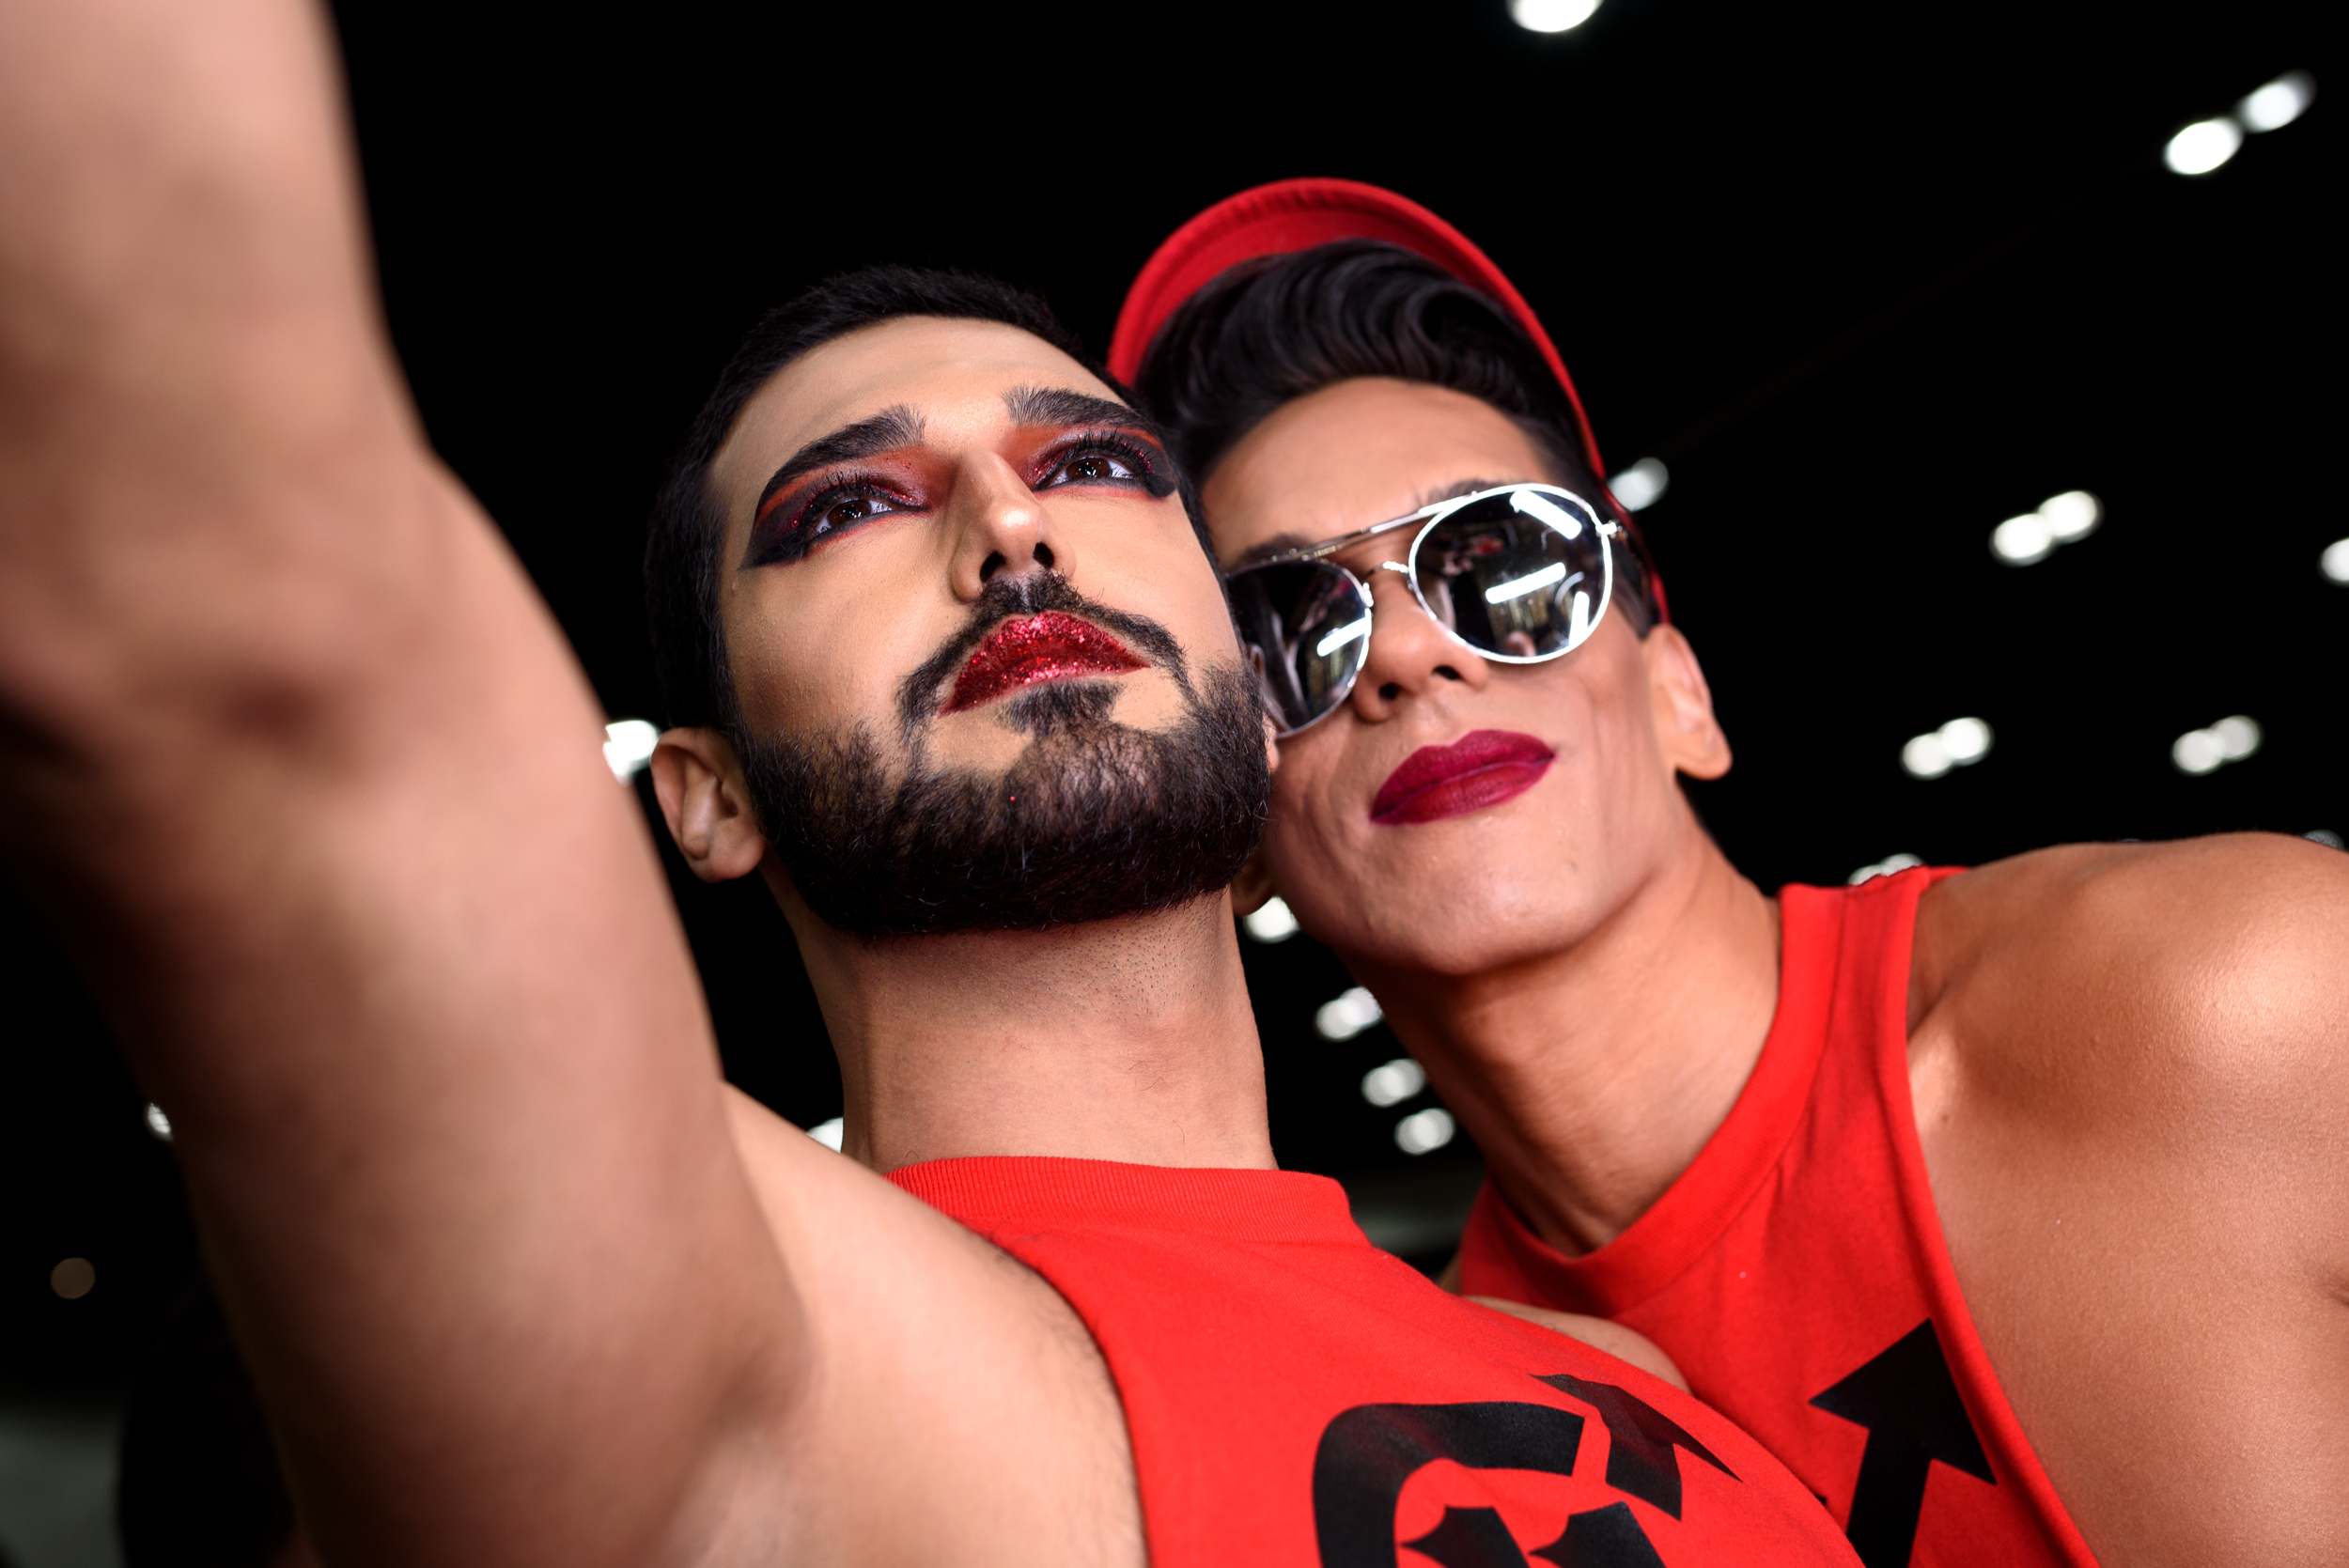 People take a selfie during RuPaul's DragCon at the Los Angeles 